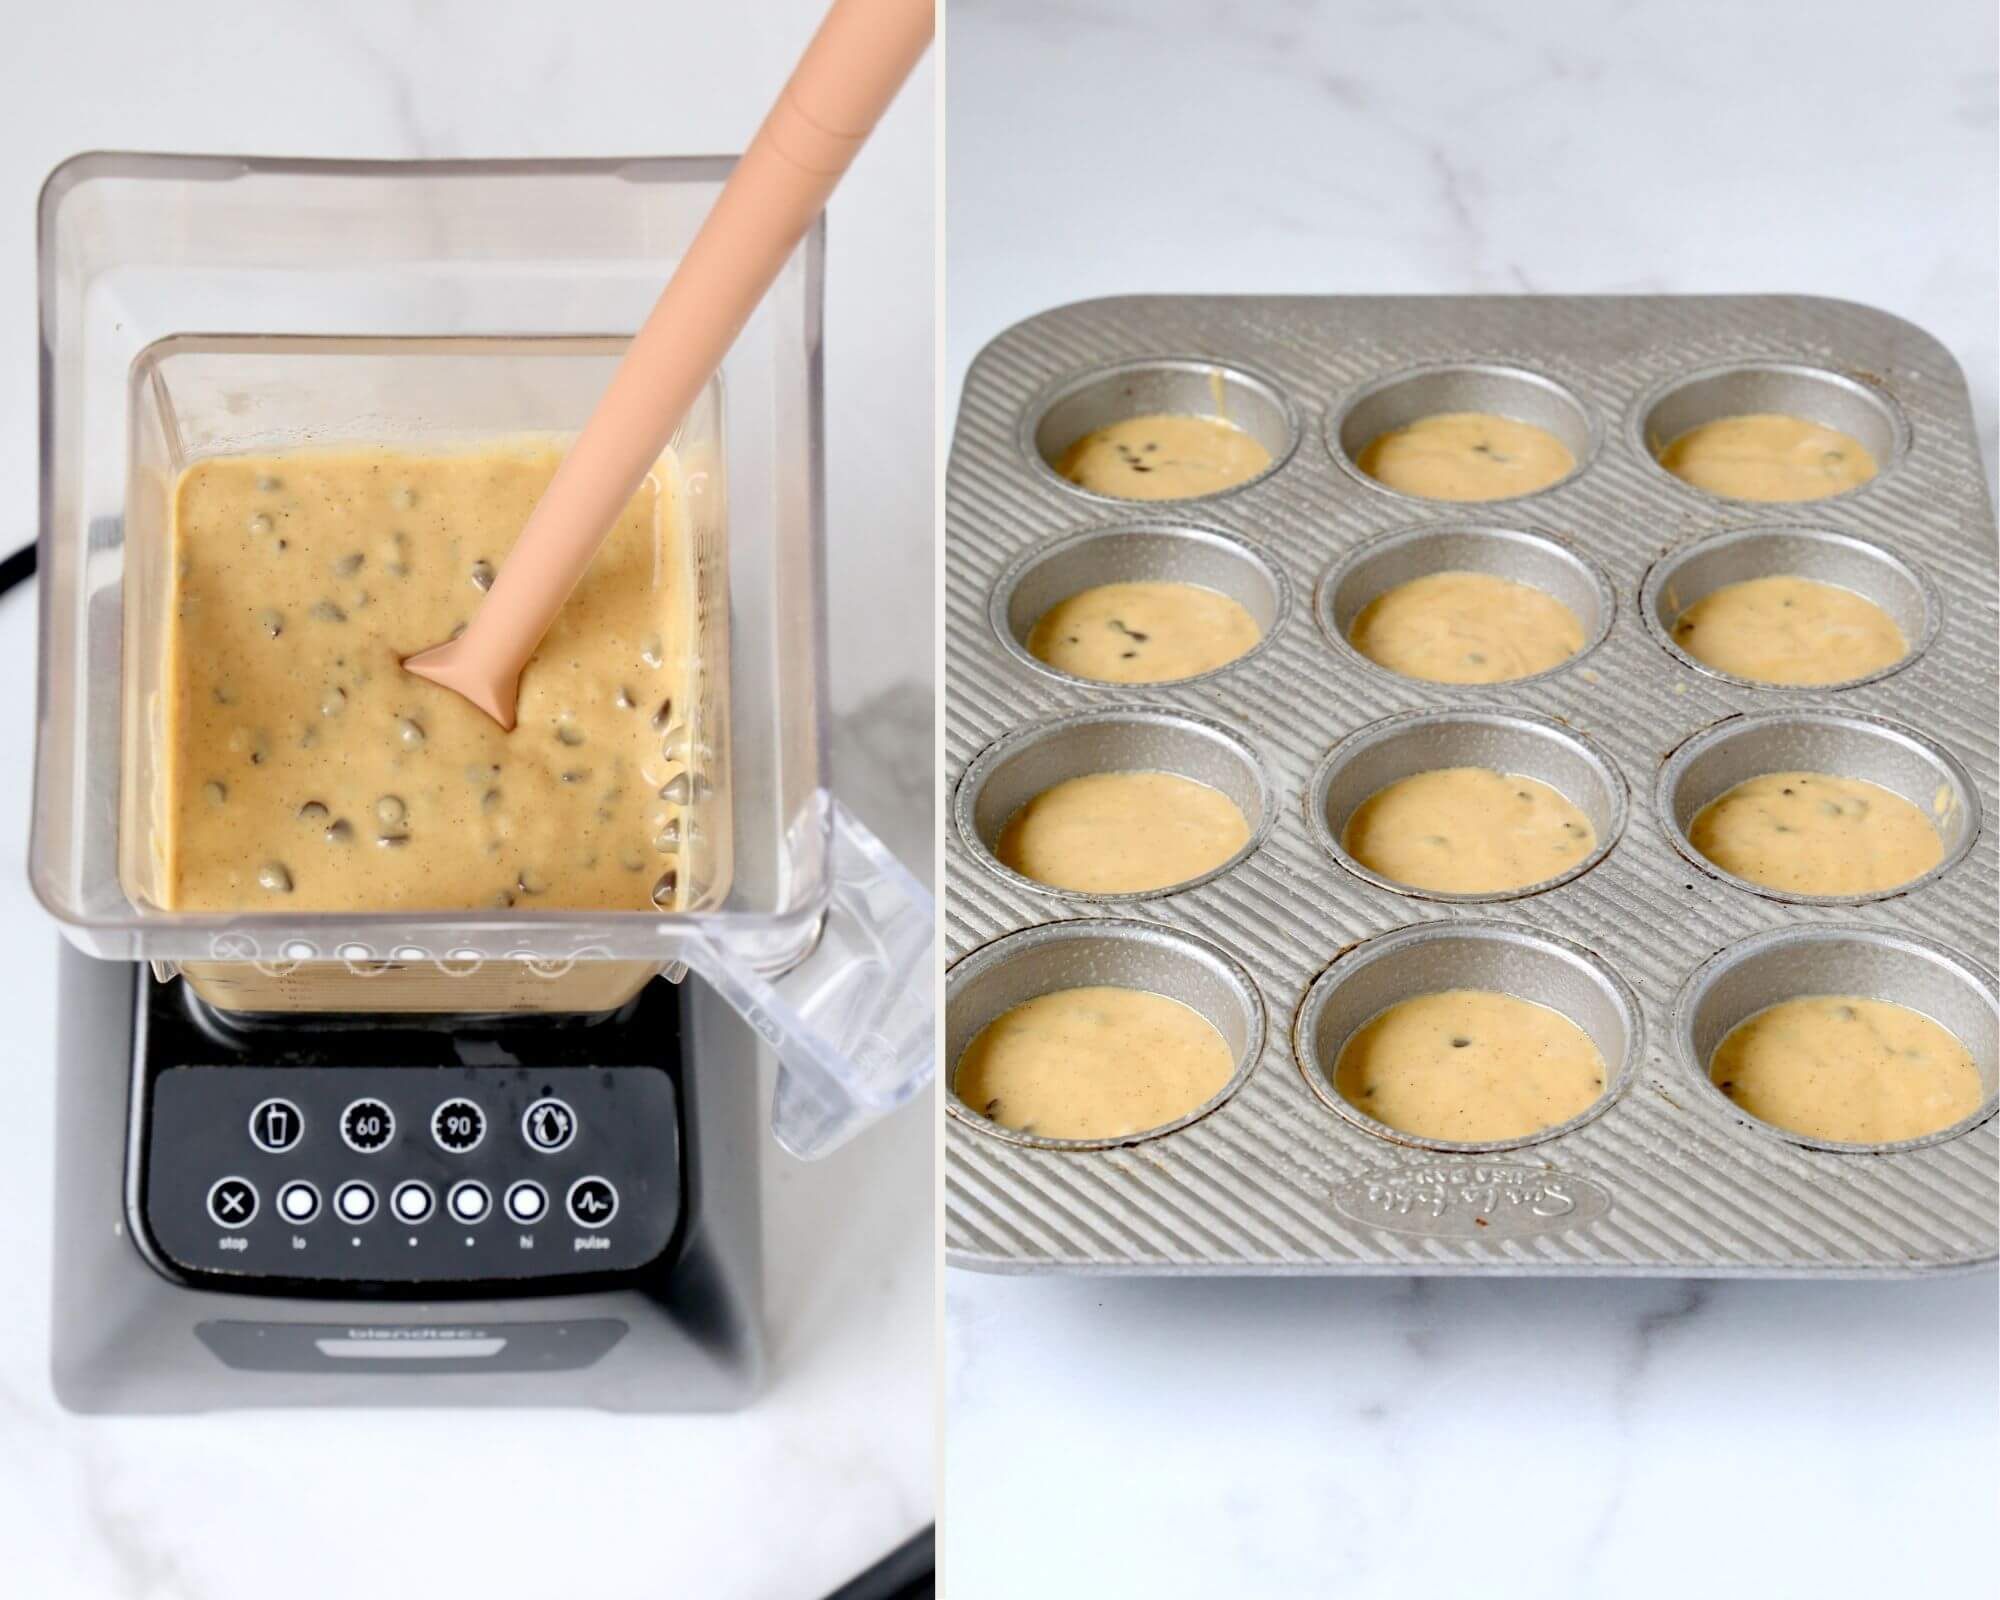 One photo showing a blender with muffin batter next to a muffin pan filled with batter. 